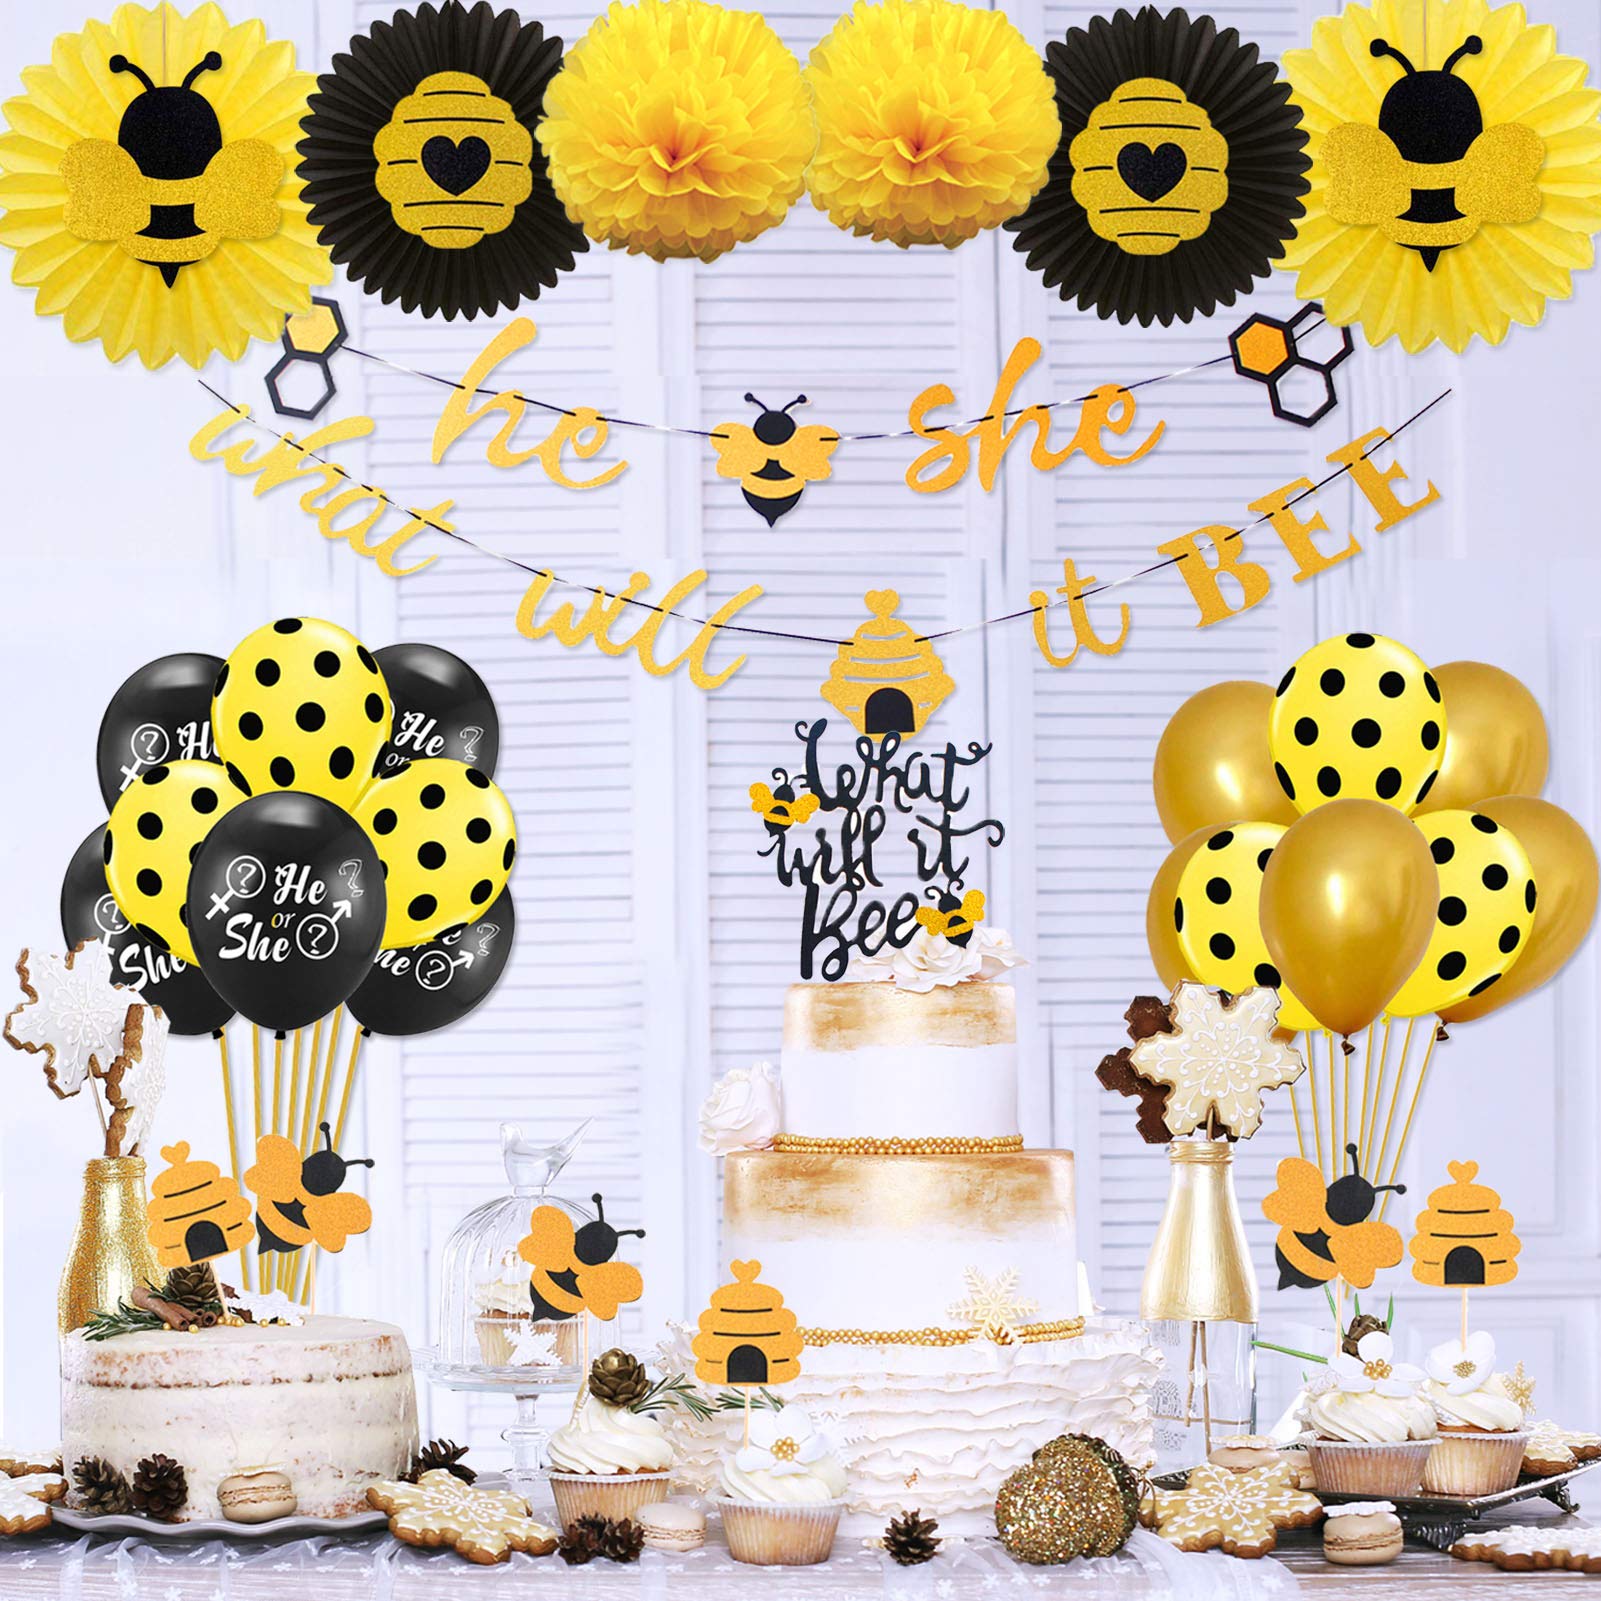 What Will It Bee Decorations